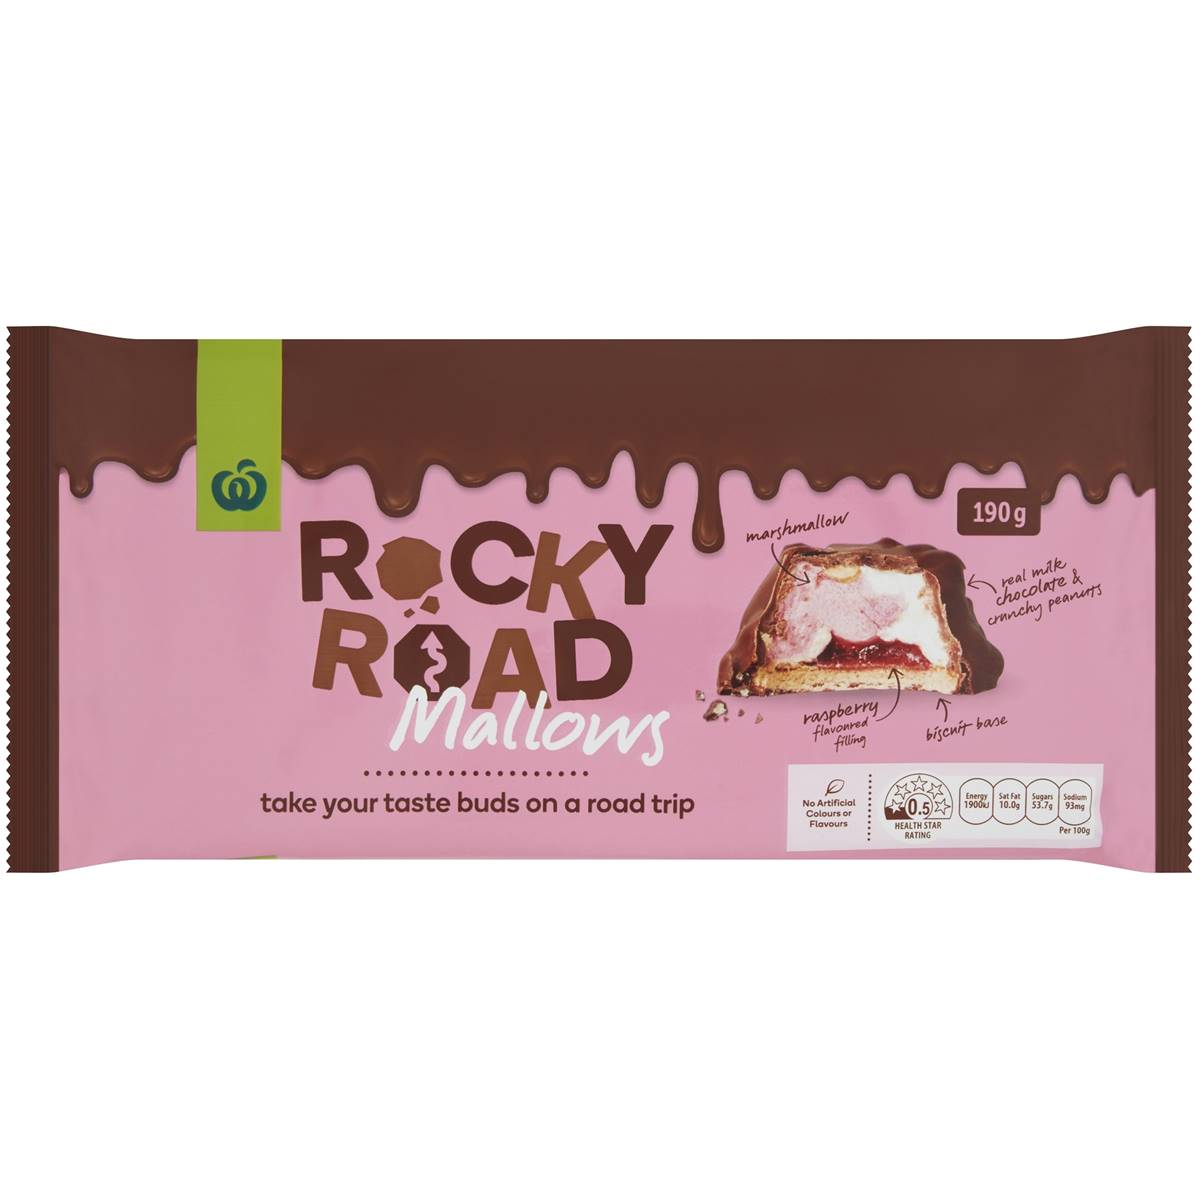 Calories in Woolworths Rocky Road Mallows Biscuits